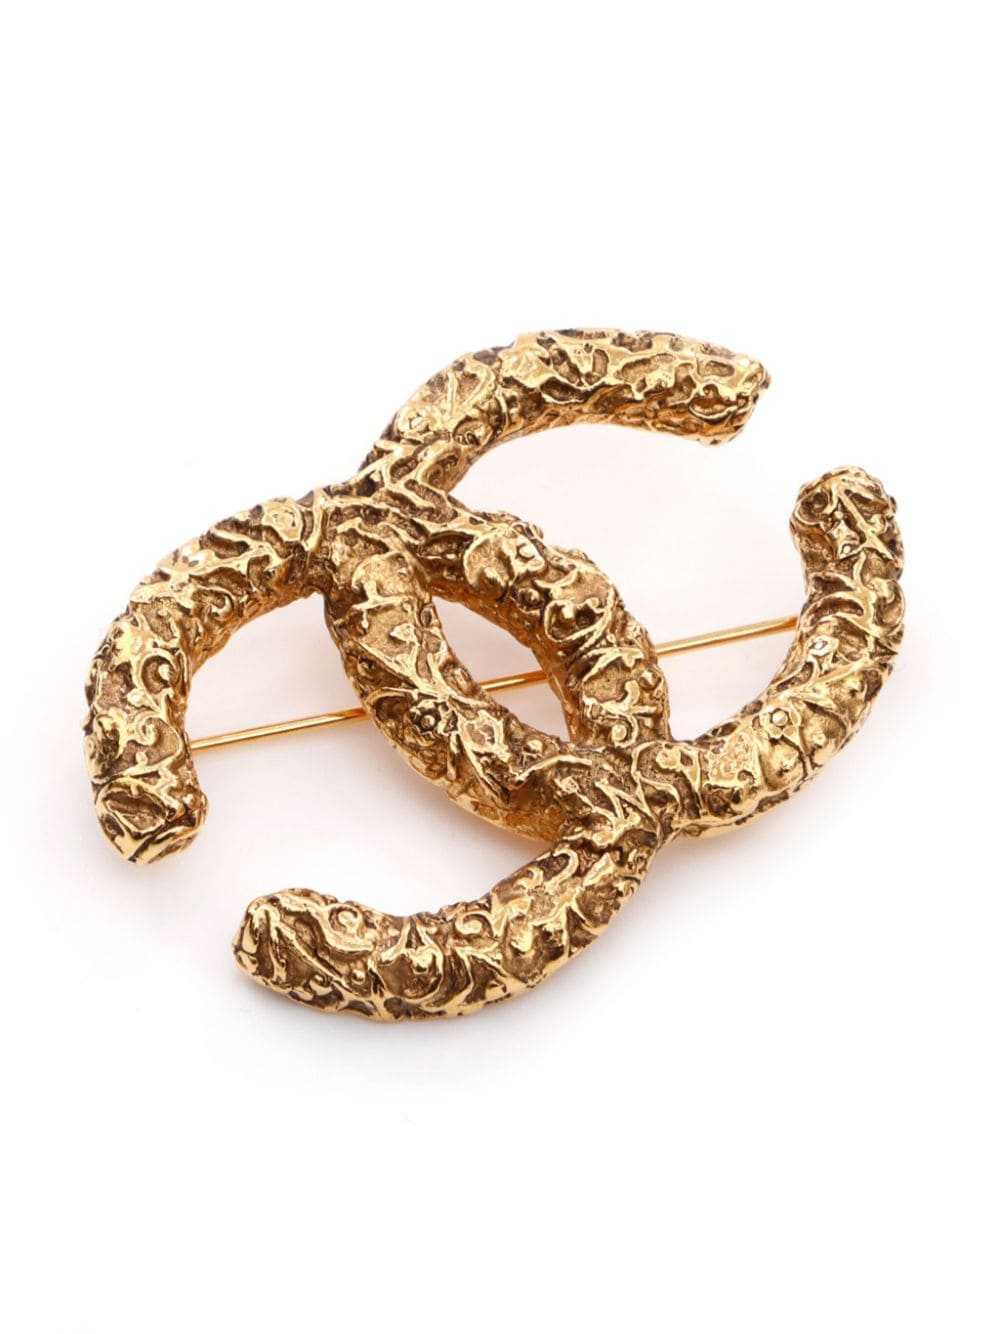 CHANEL Pre-Owned 1993 CC gold plated brooch - image 3